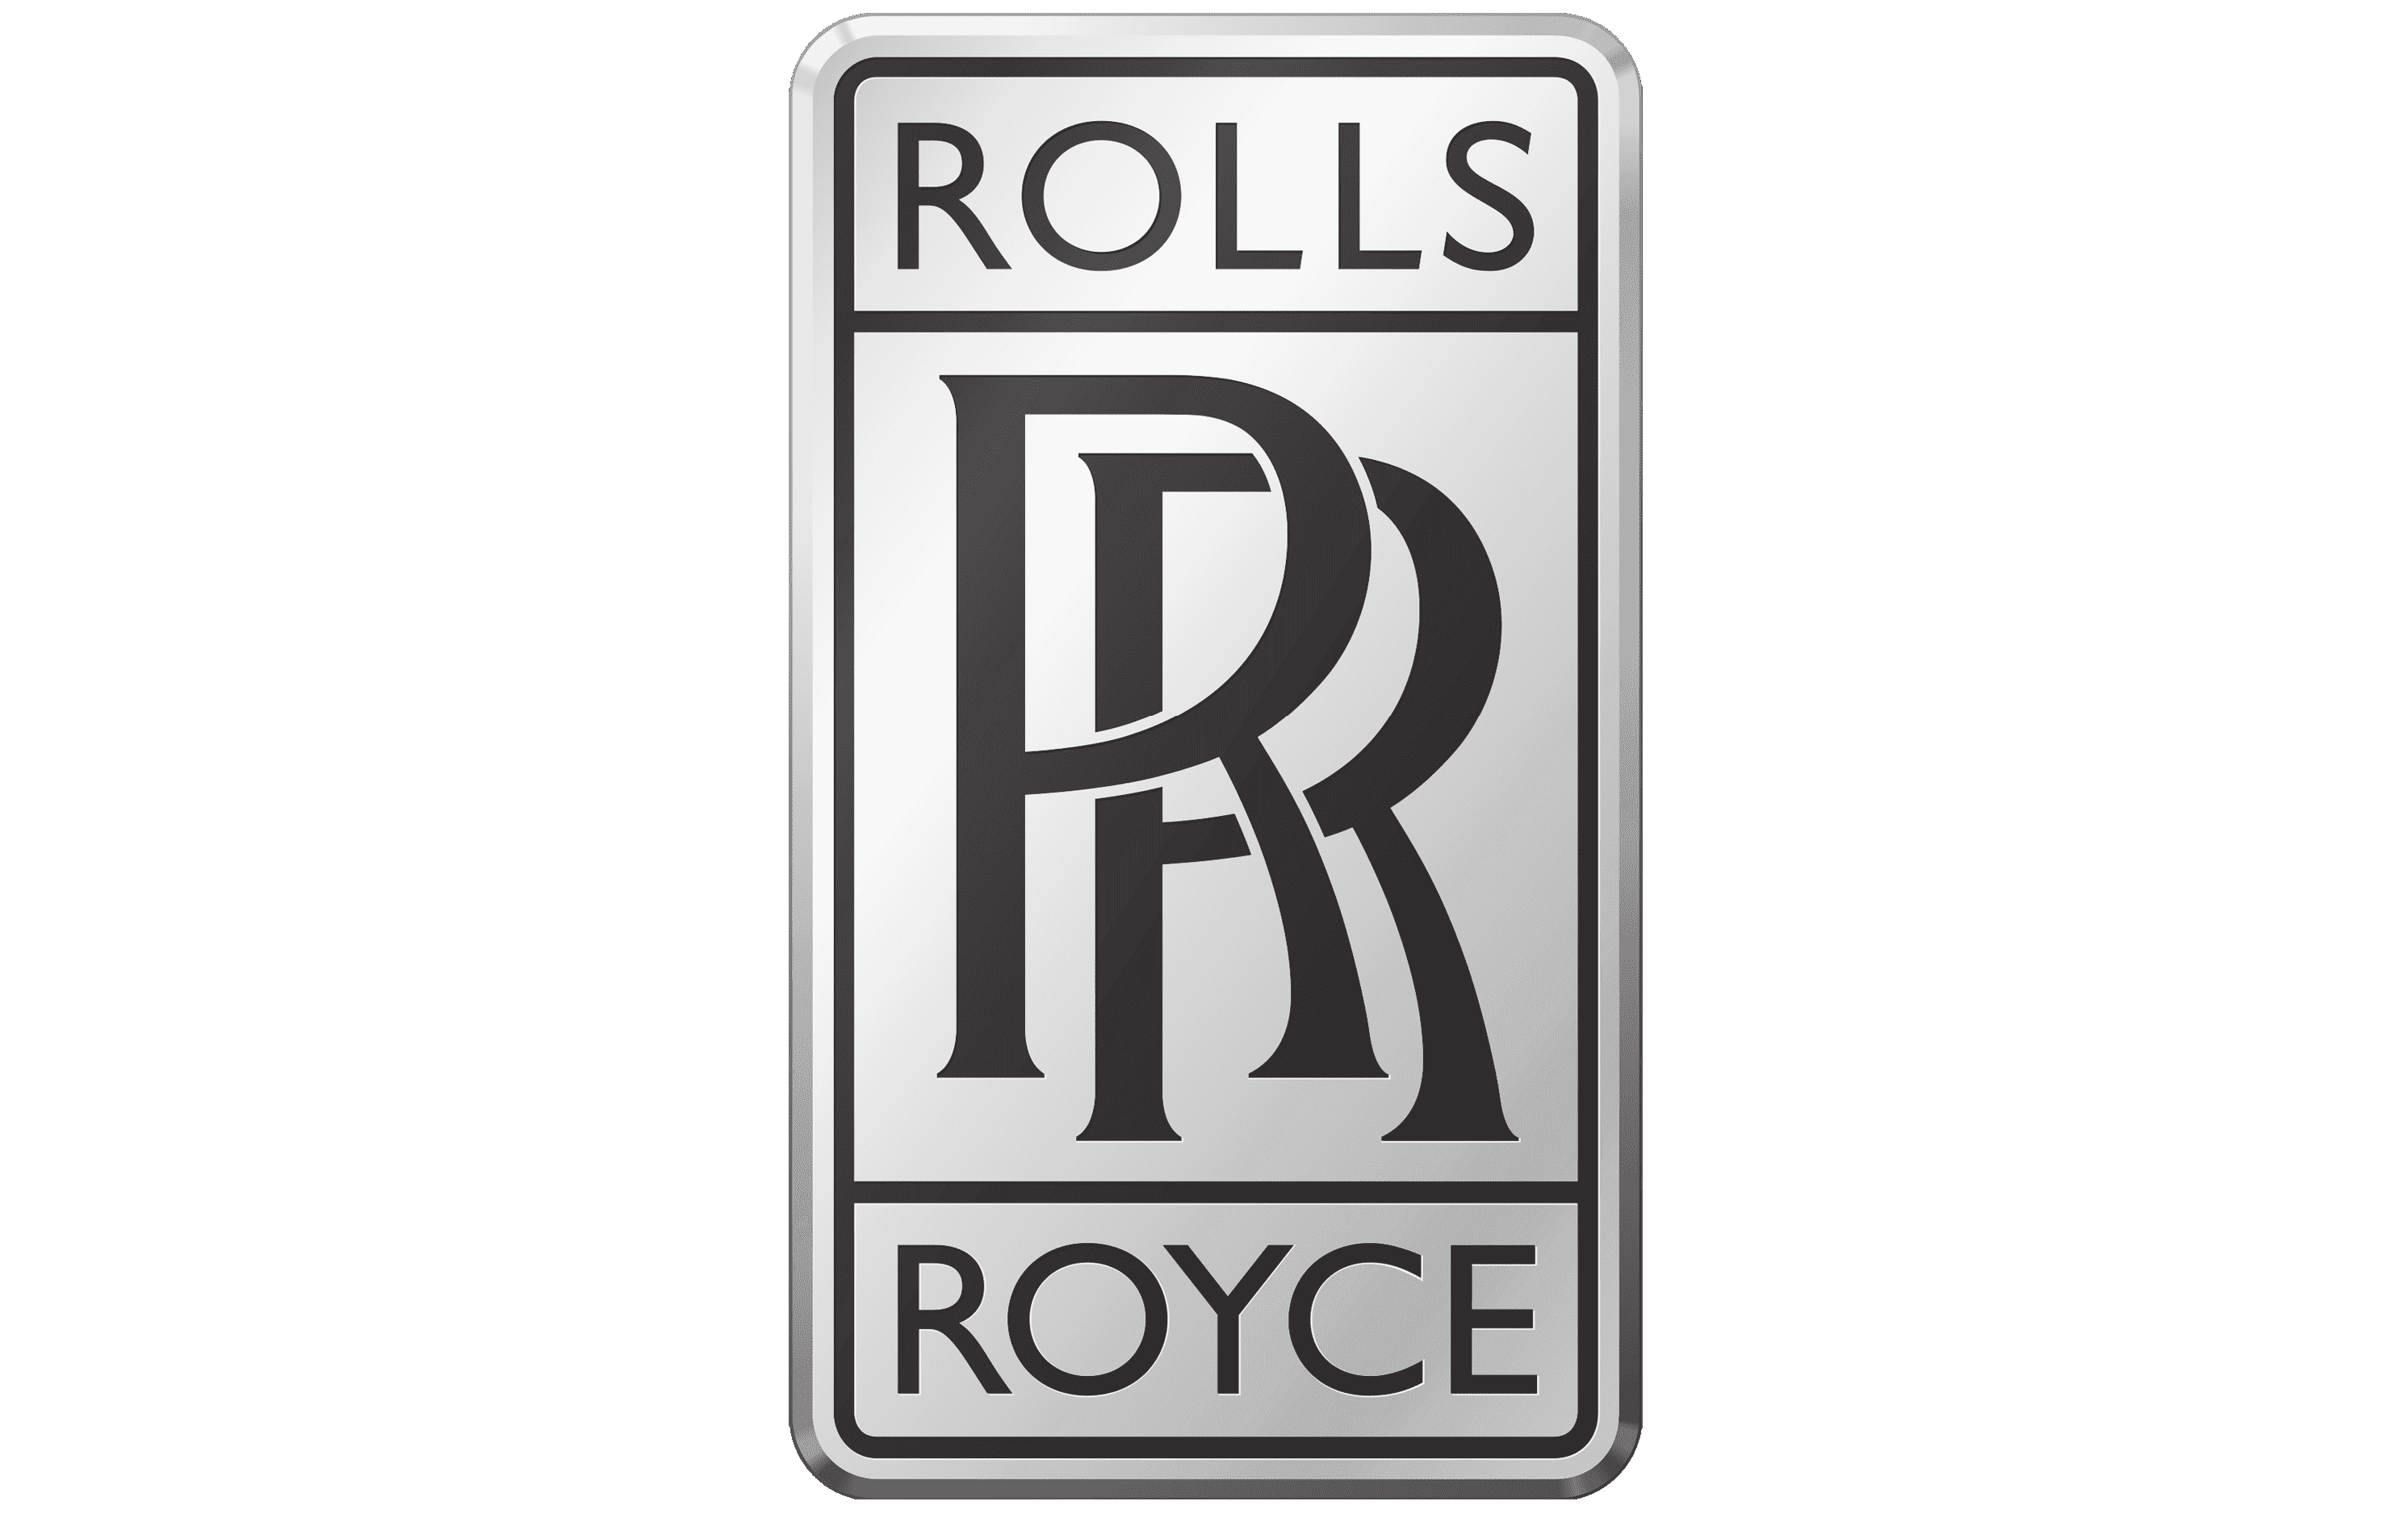 The Rolls Royce logo (symbol) that was created for the company